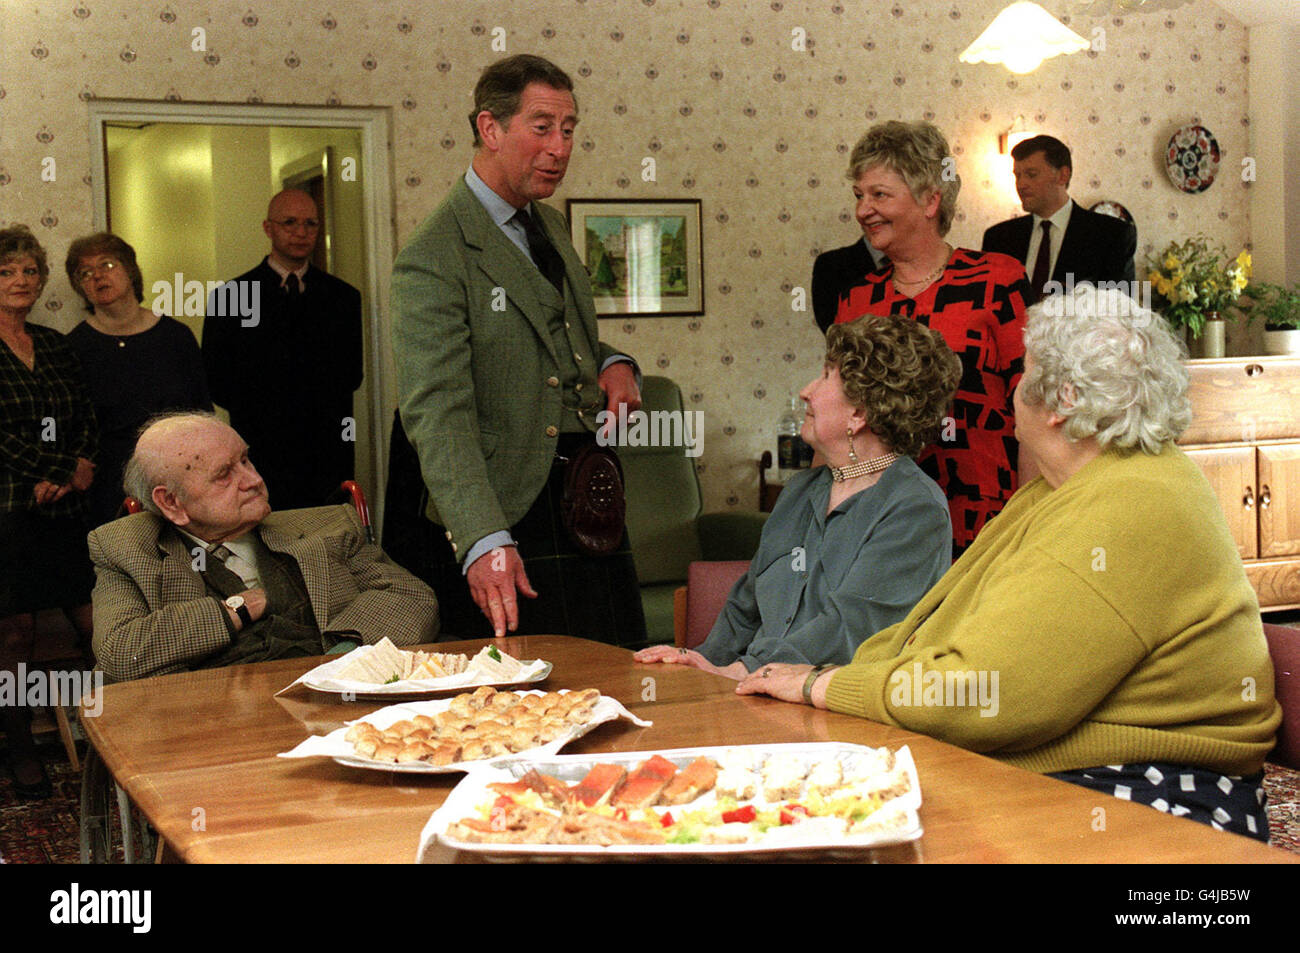 The Prince Of Wales speaks with residents at the Seaforth House Residential and Day Care Centre in Golspie, Scotland. The Prince's last visit to the centre was when he opened it 19 years ago. Stock Photo